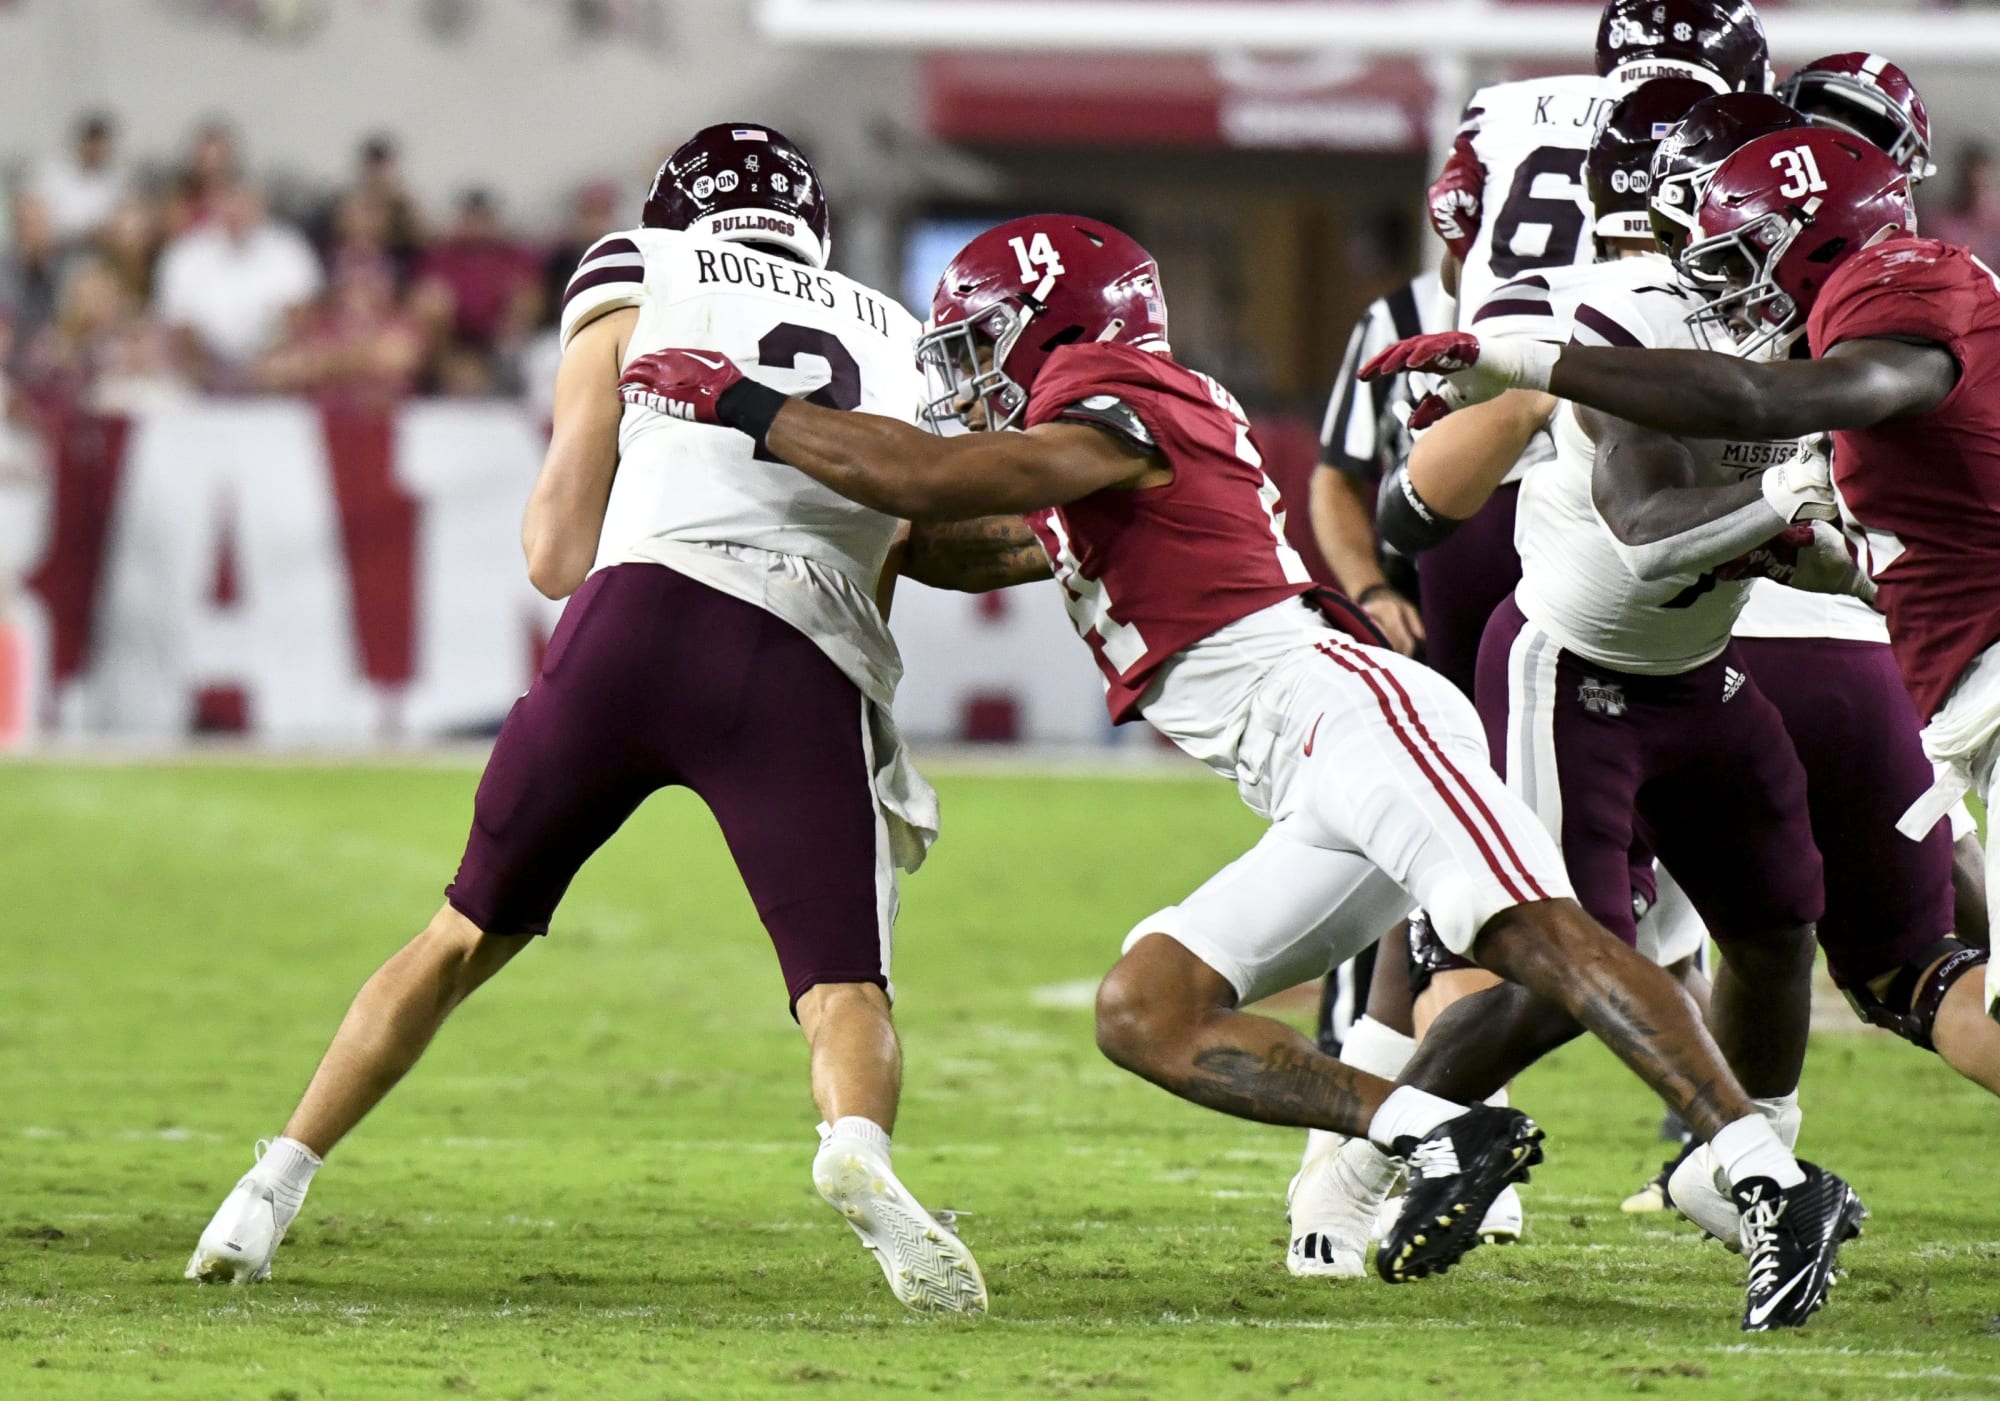 Alabama Football: Mississippi State searching for offensive identity